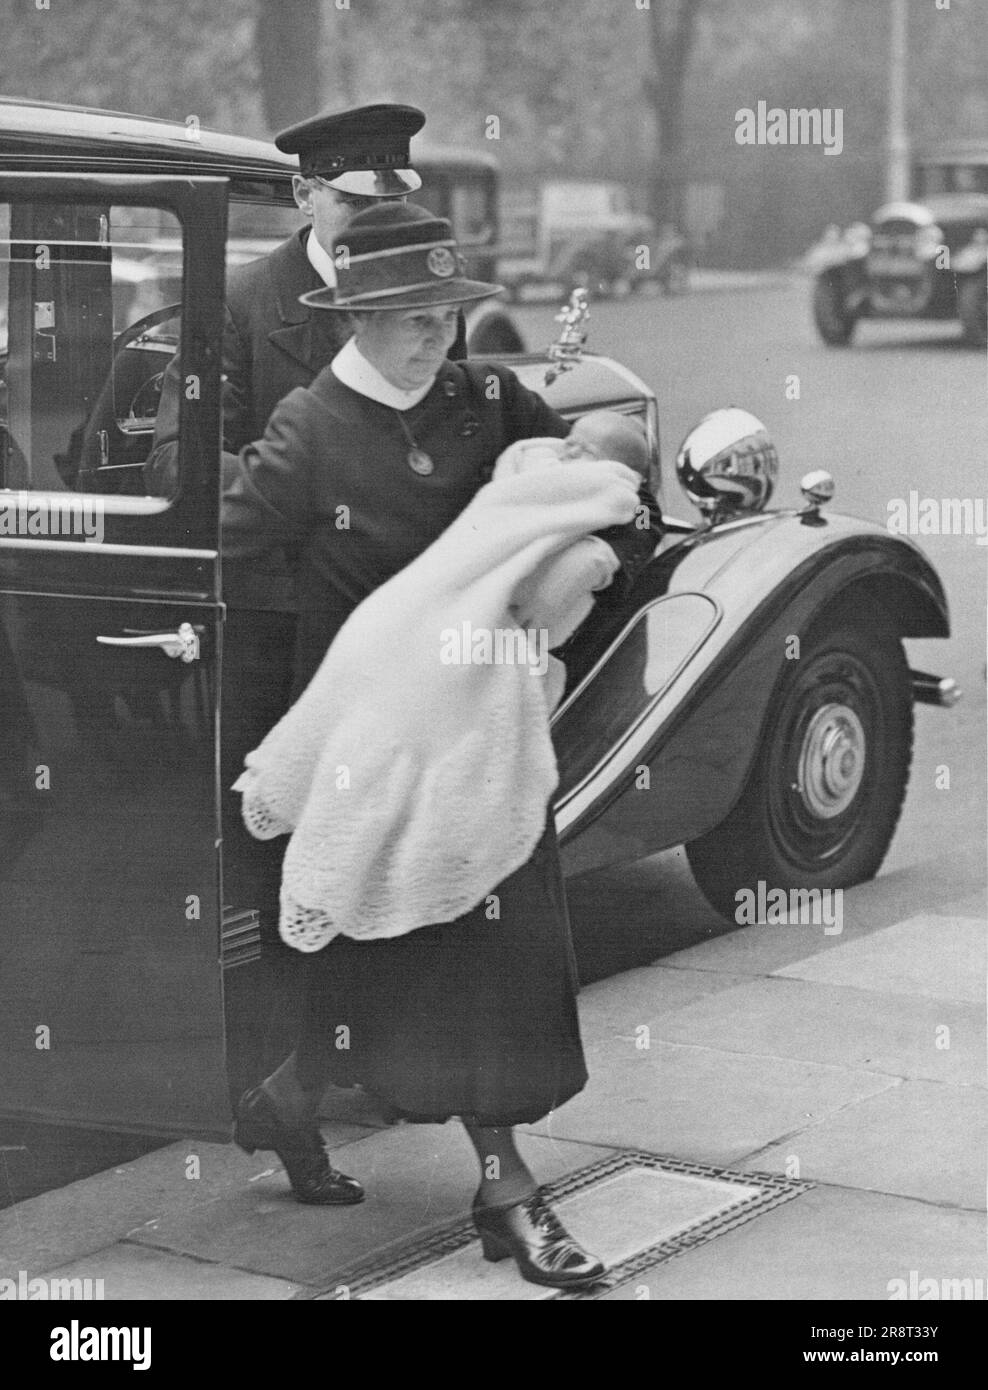 New Royal Baby Goes Out - The infant son of the Duke and Duchess of Kent being carried by his nurse of returning to No.3, Belgrave Square after an outing. October 30, 1935. (Photo by London News Agency Photos Ltd.). Stock Photo